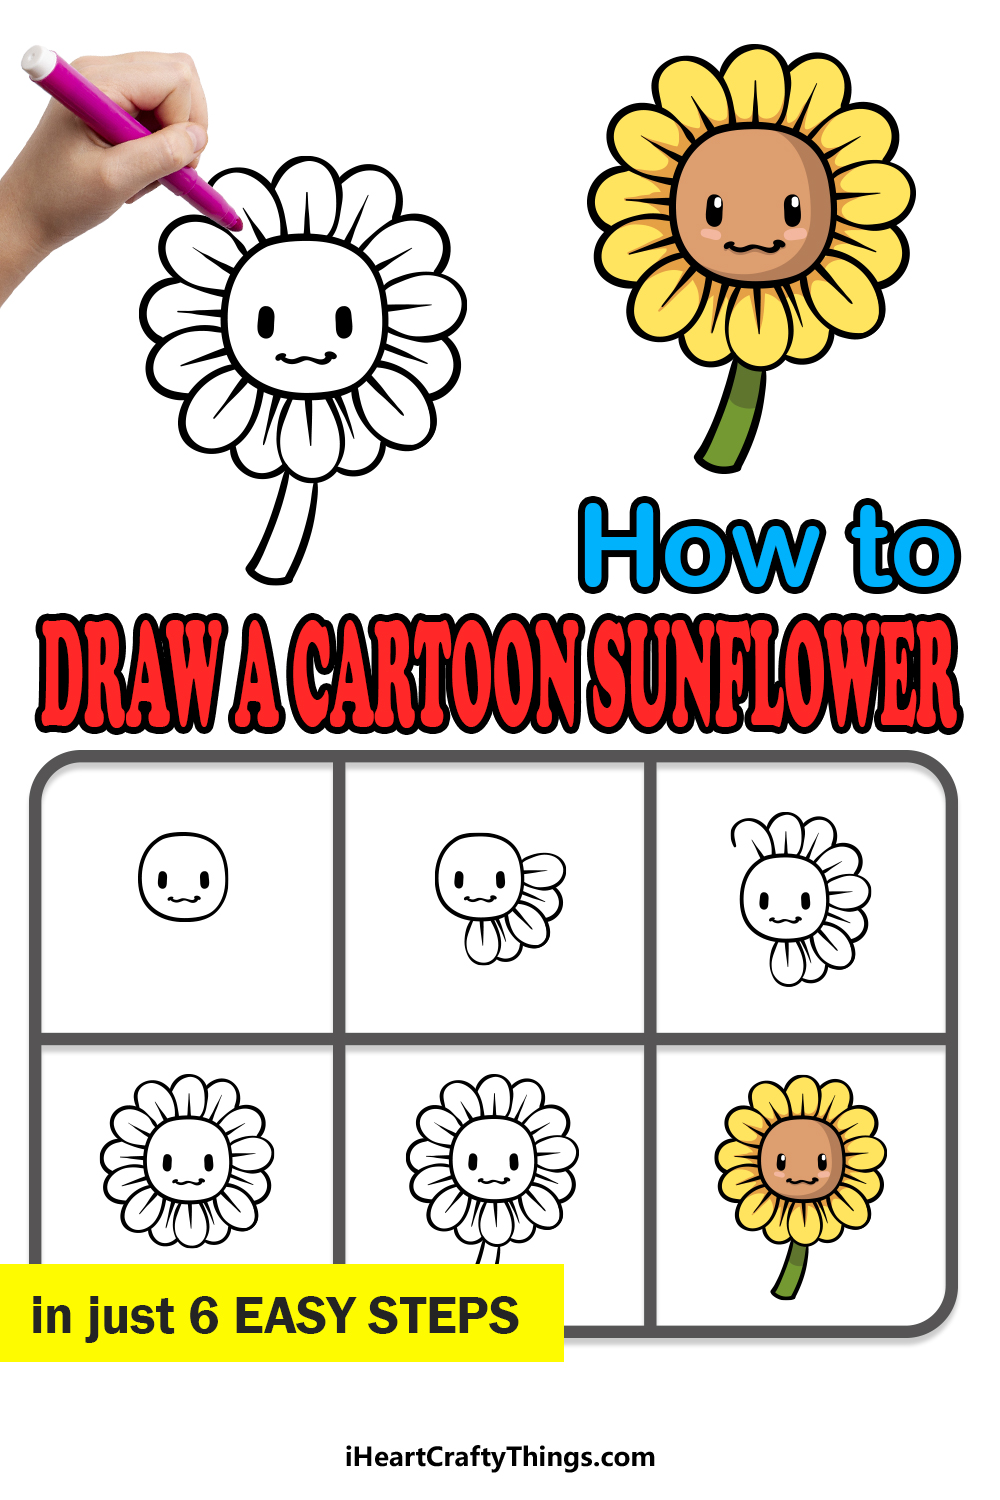 how to draw a cartoon sunflower in 6 easy steps